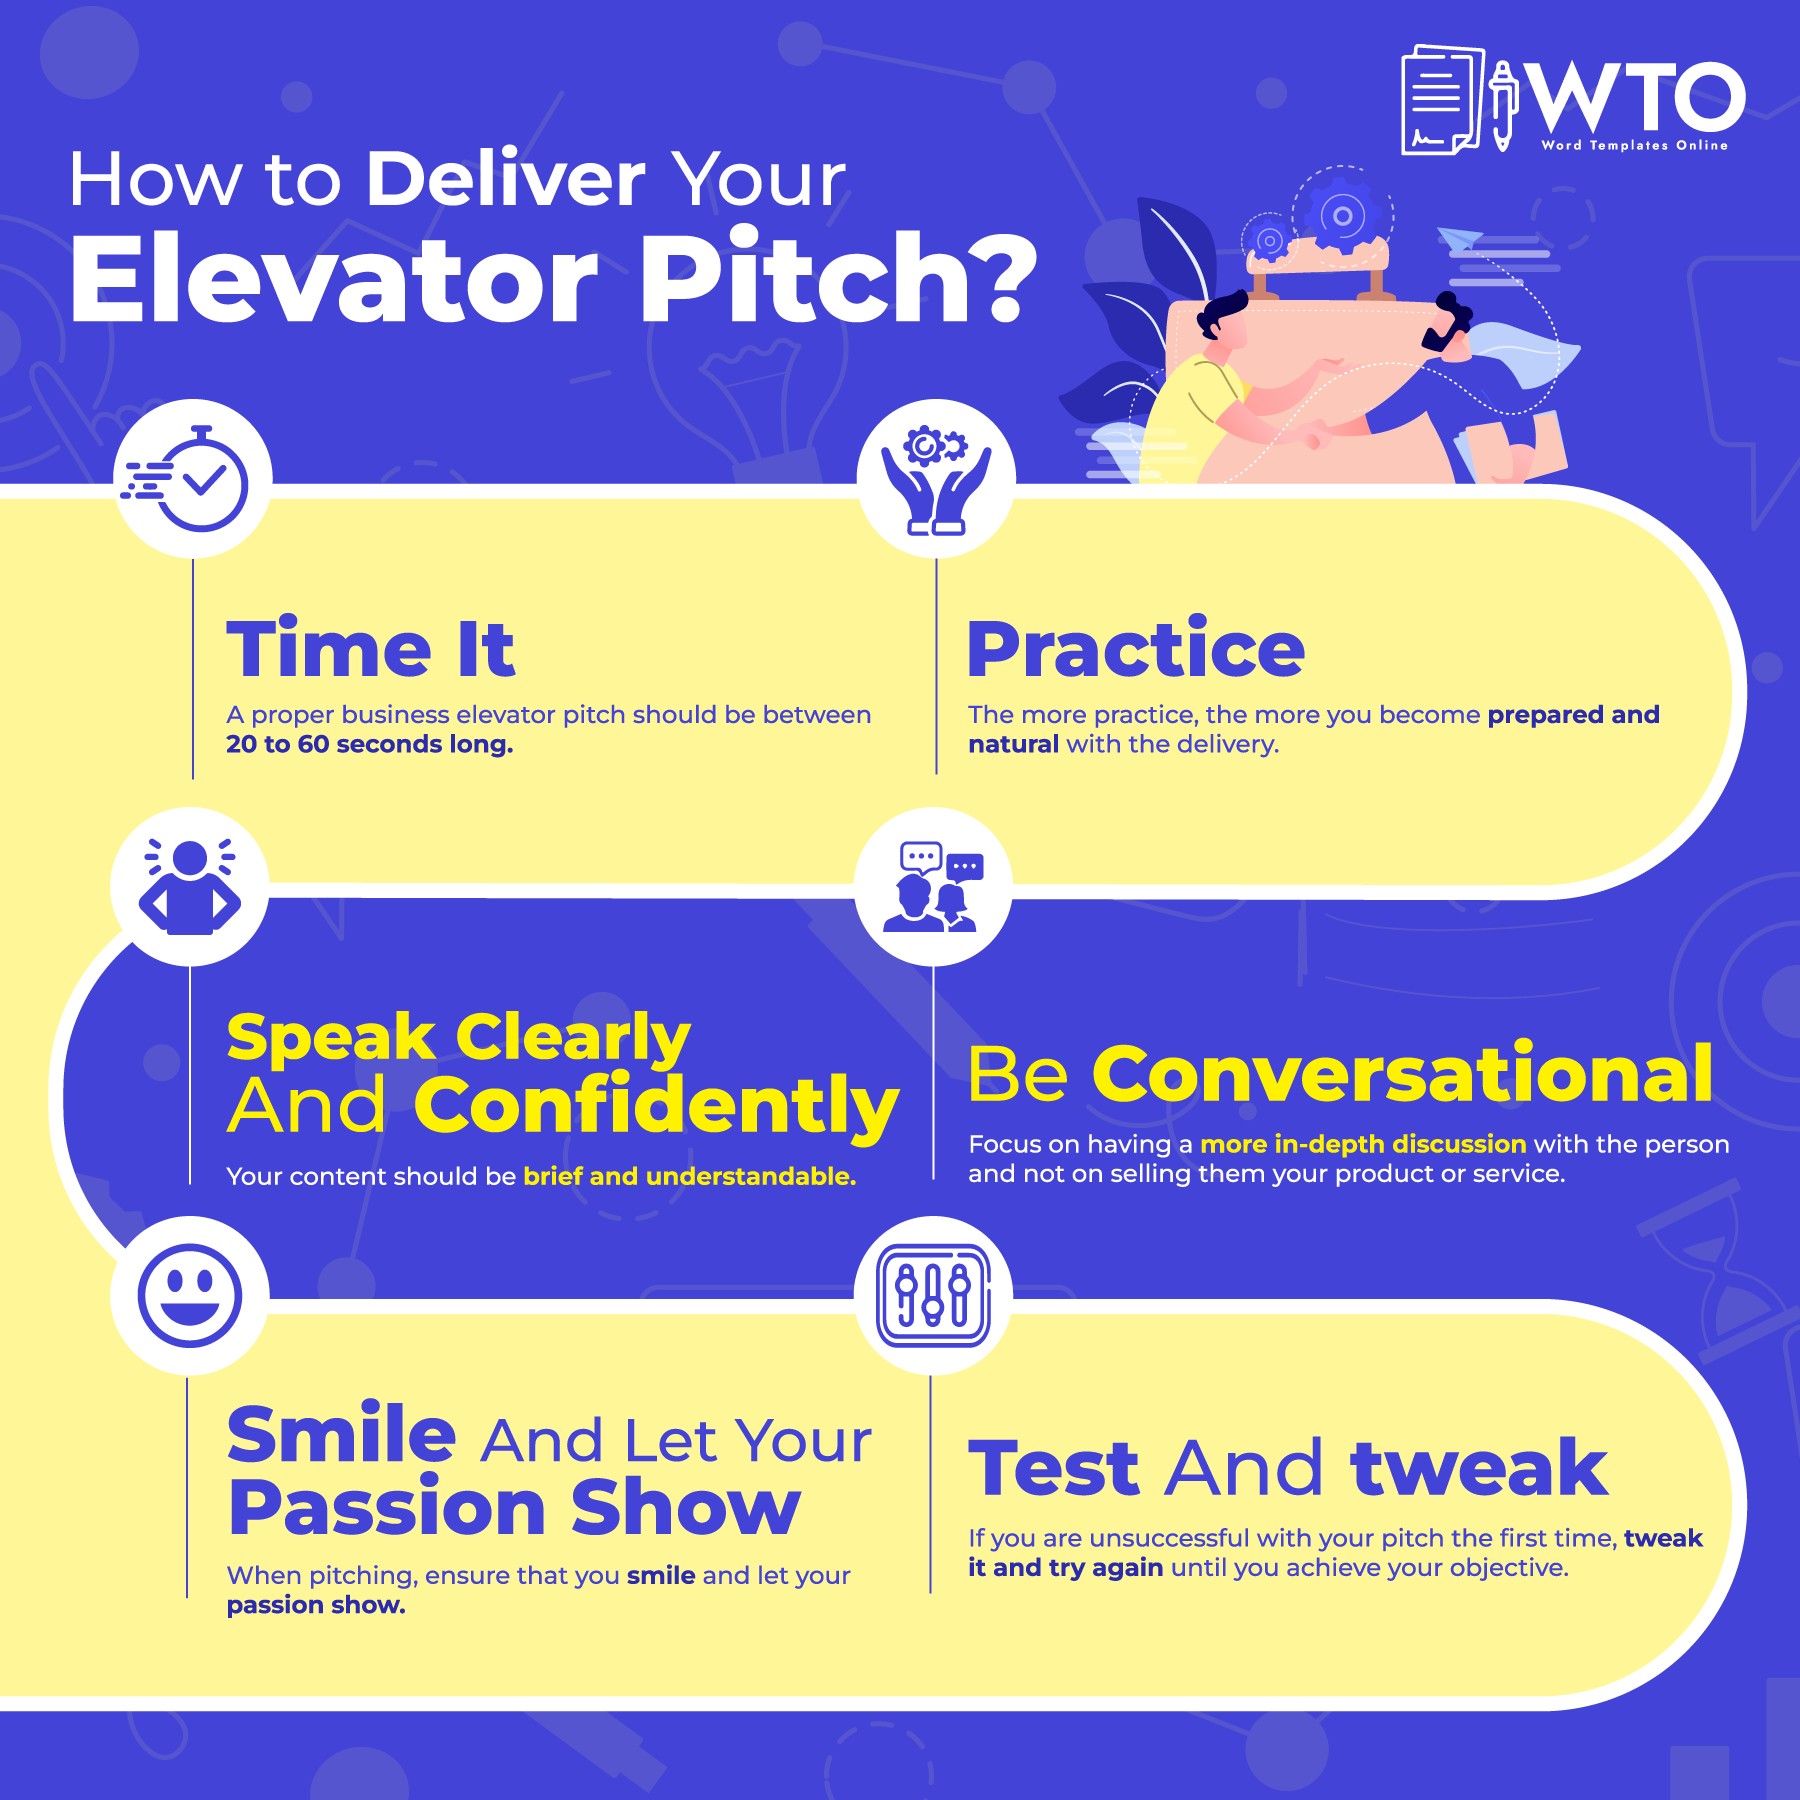 This infographic is about delivering an Elevator Pitch.